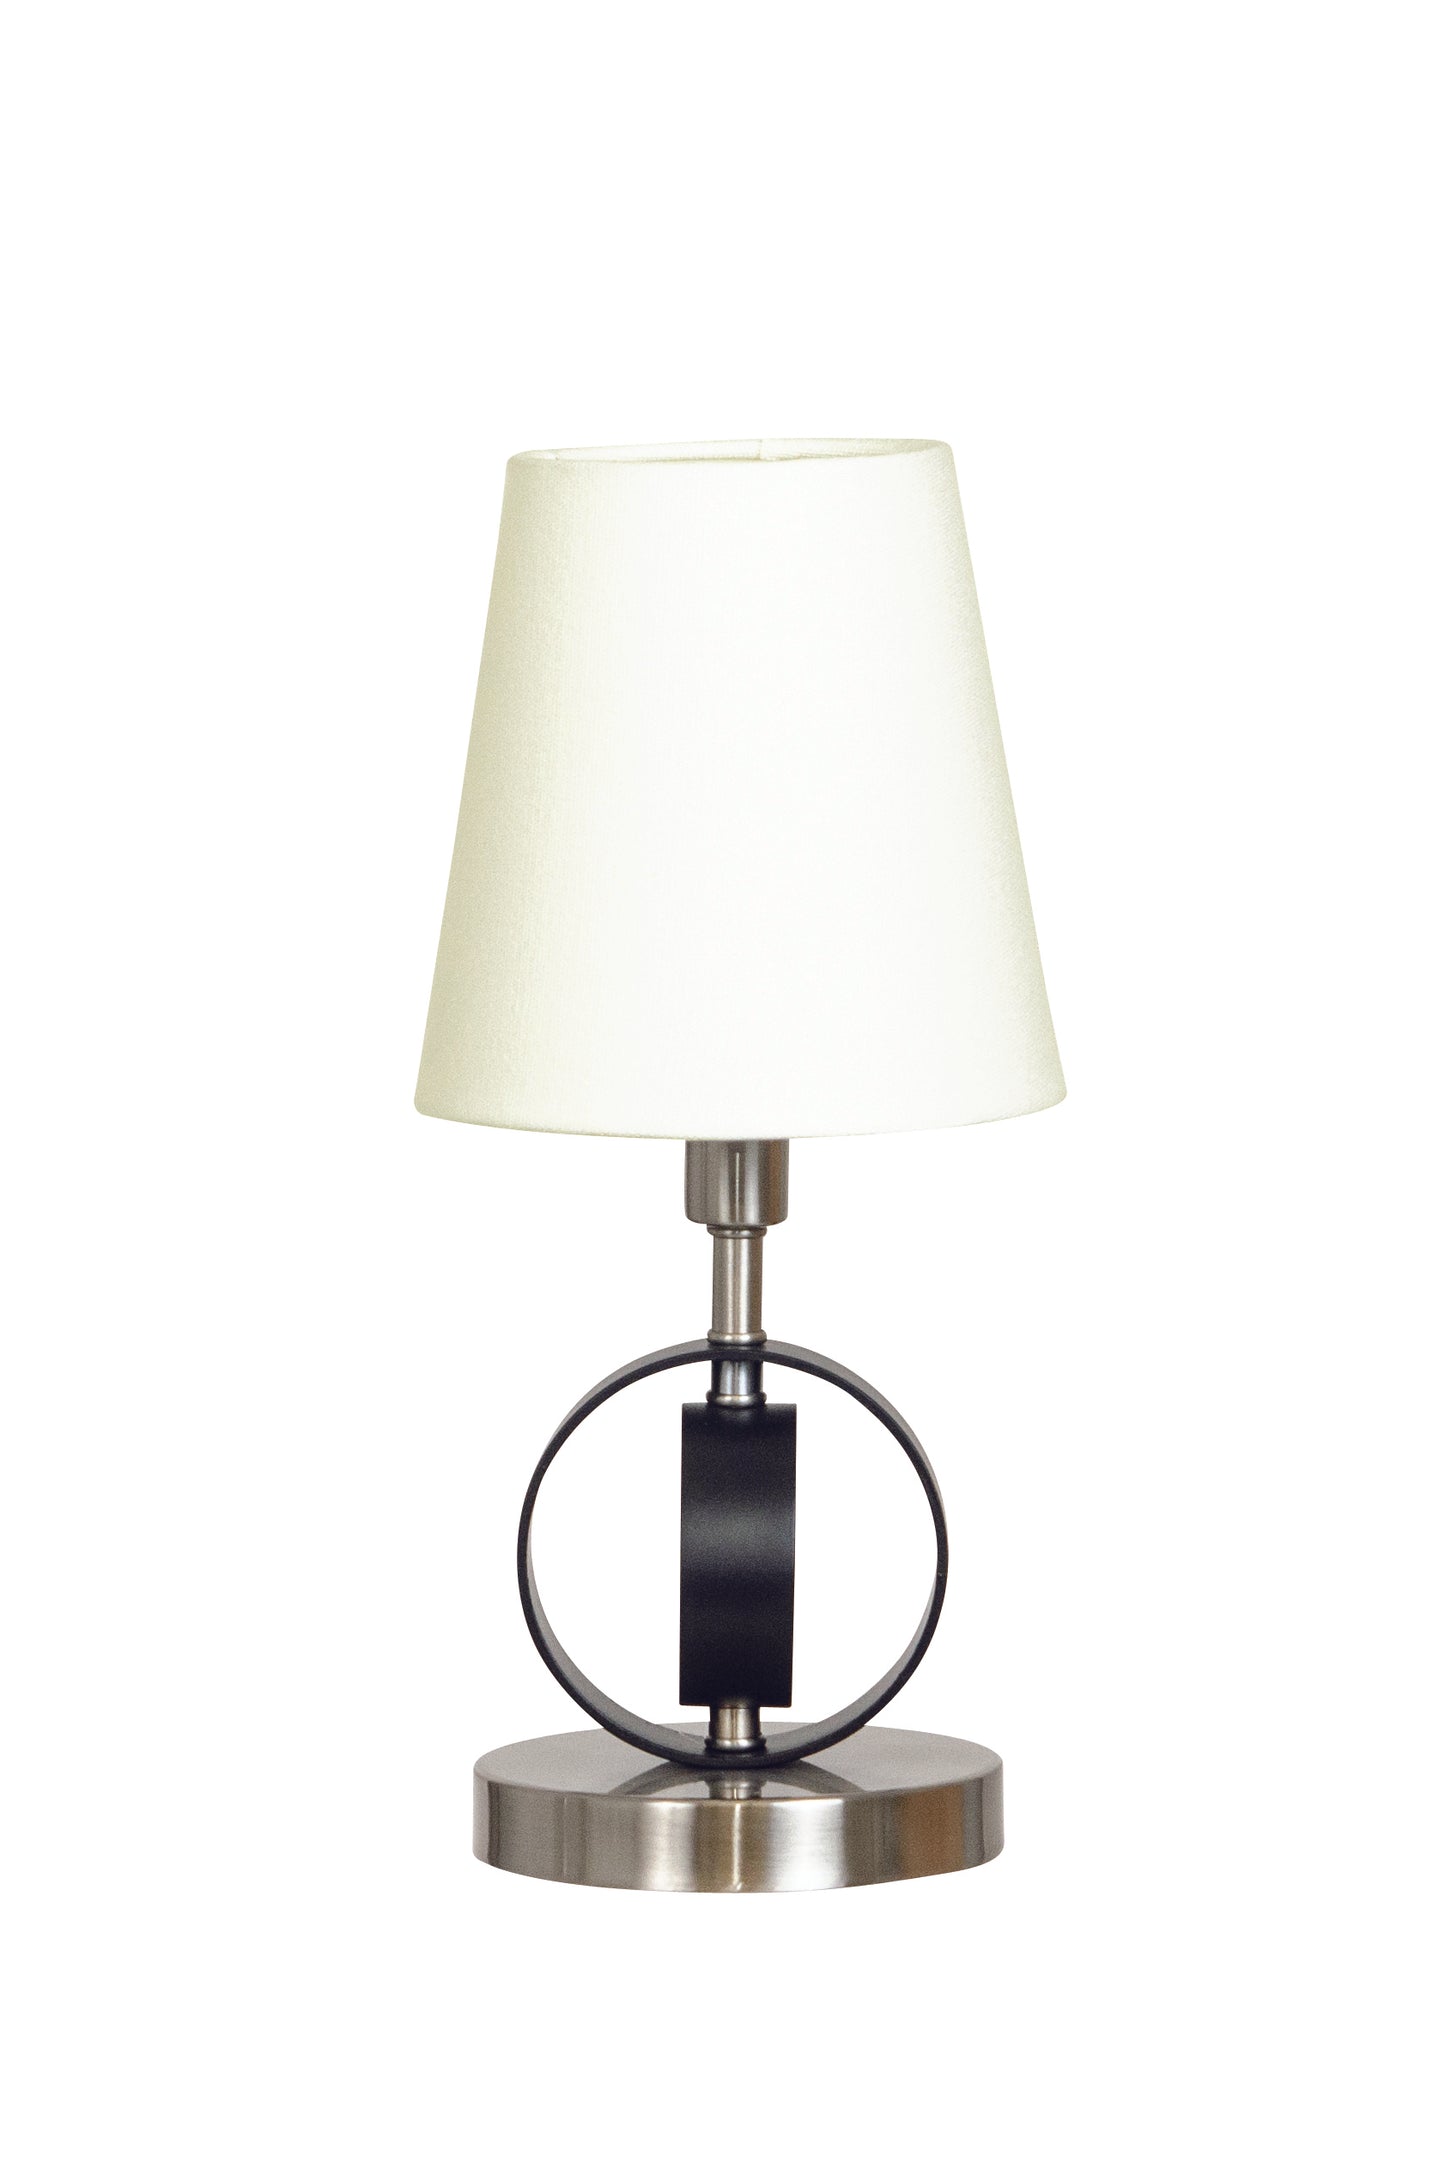 House of Troy Bryson Mini 4" ring satin nickel with black rings accent lamp B209-SN/BLK